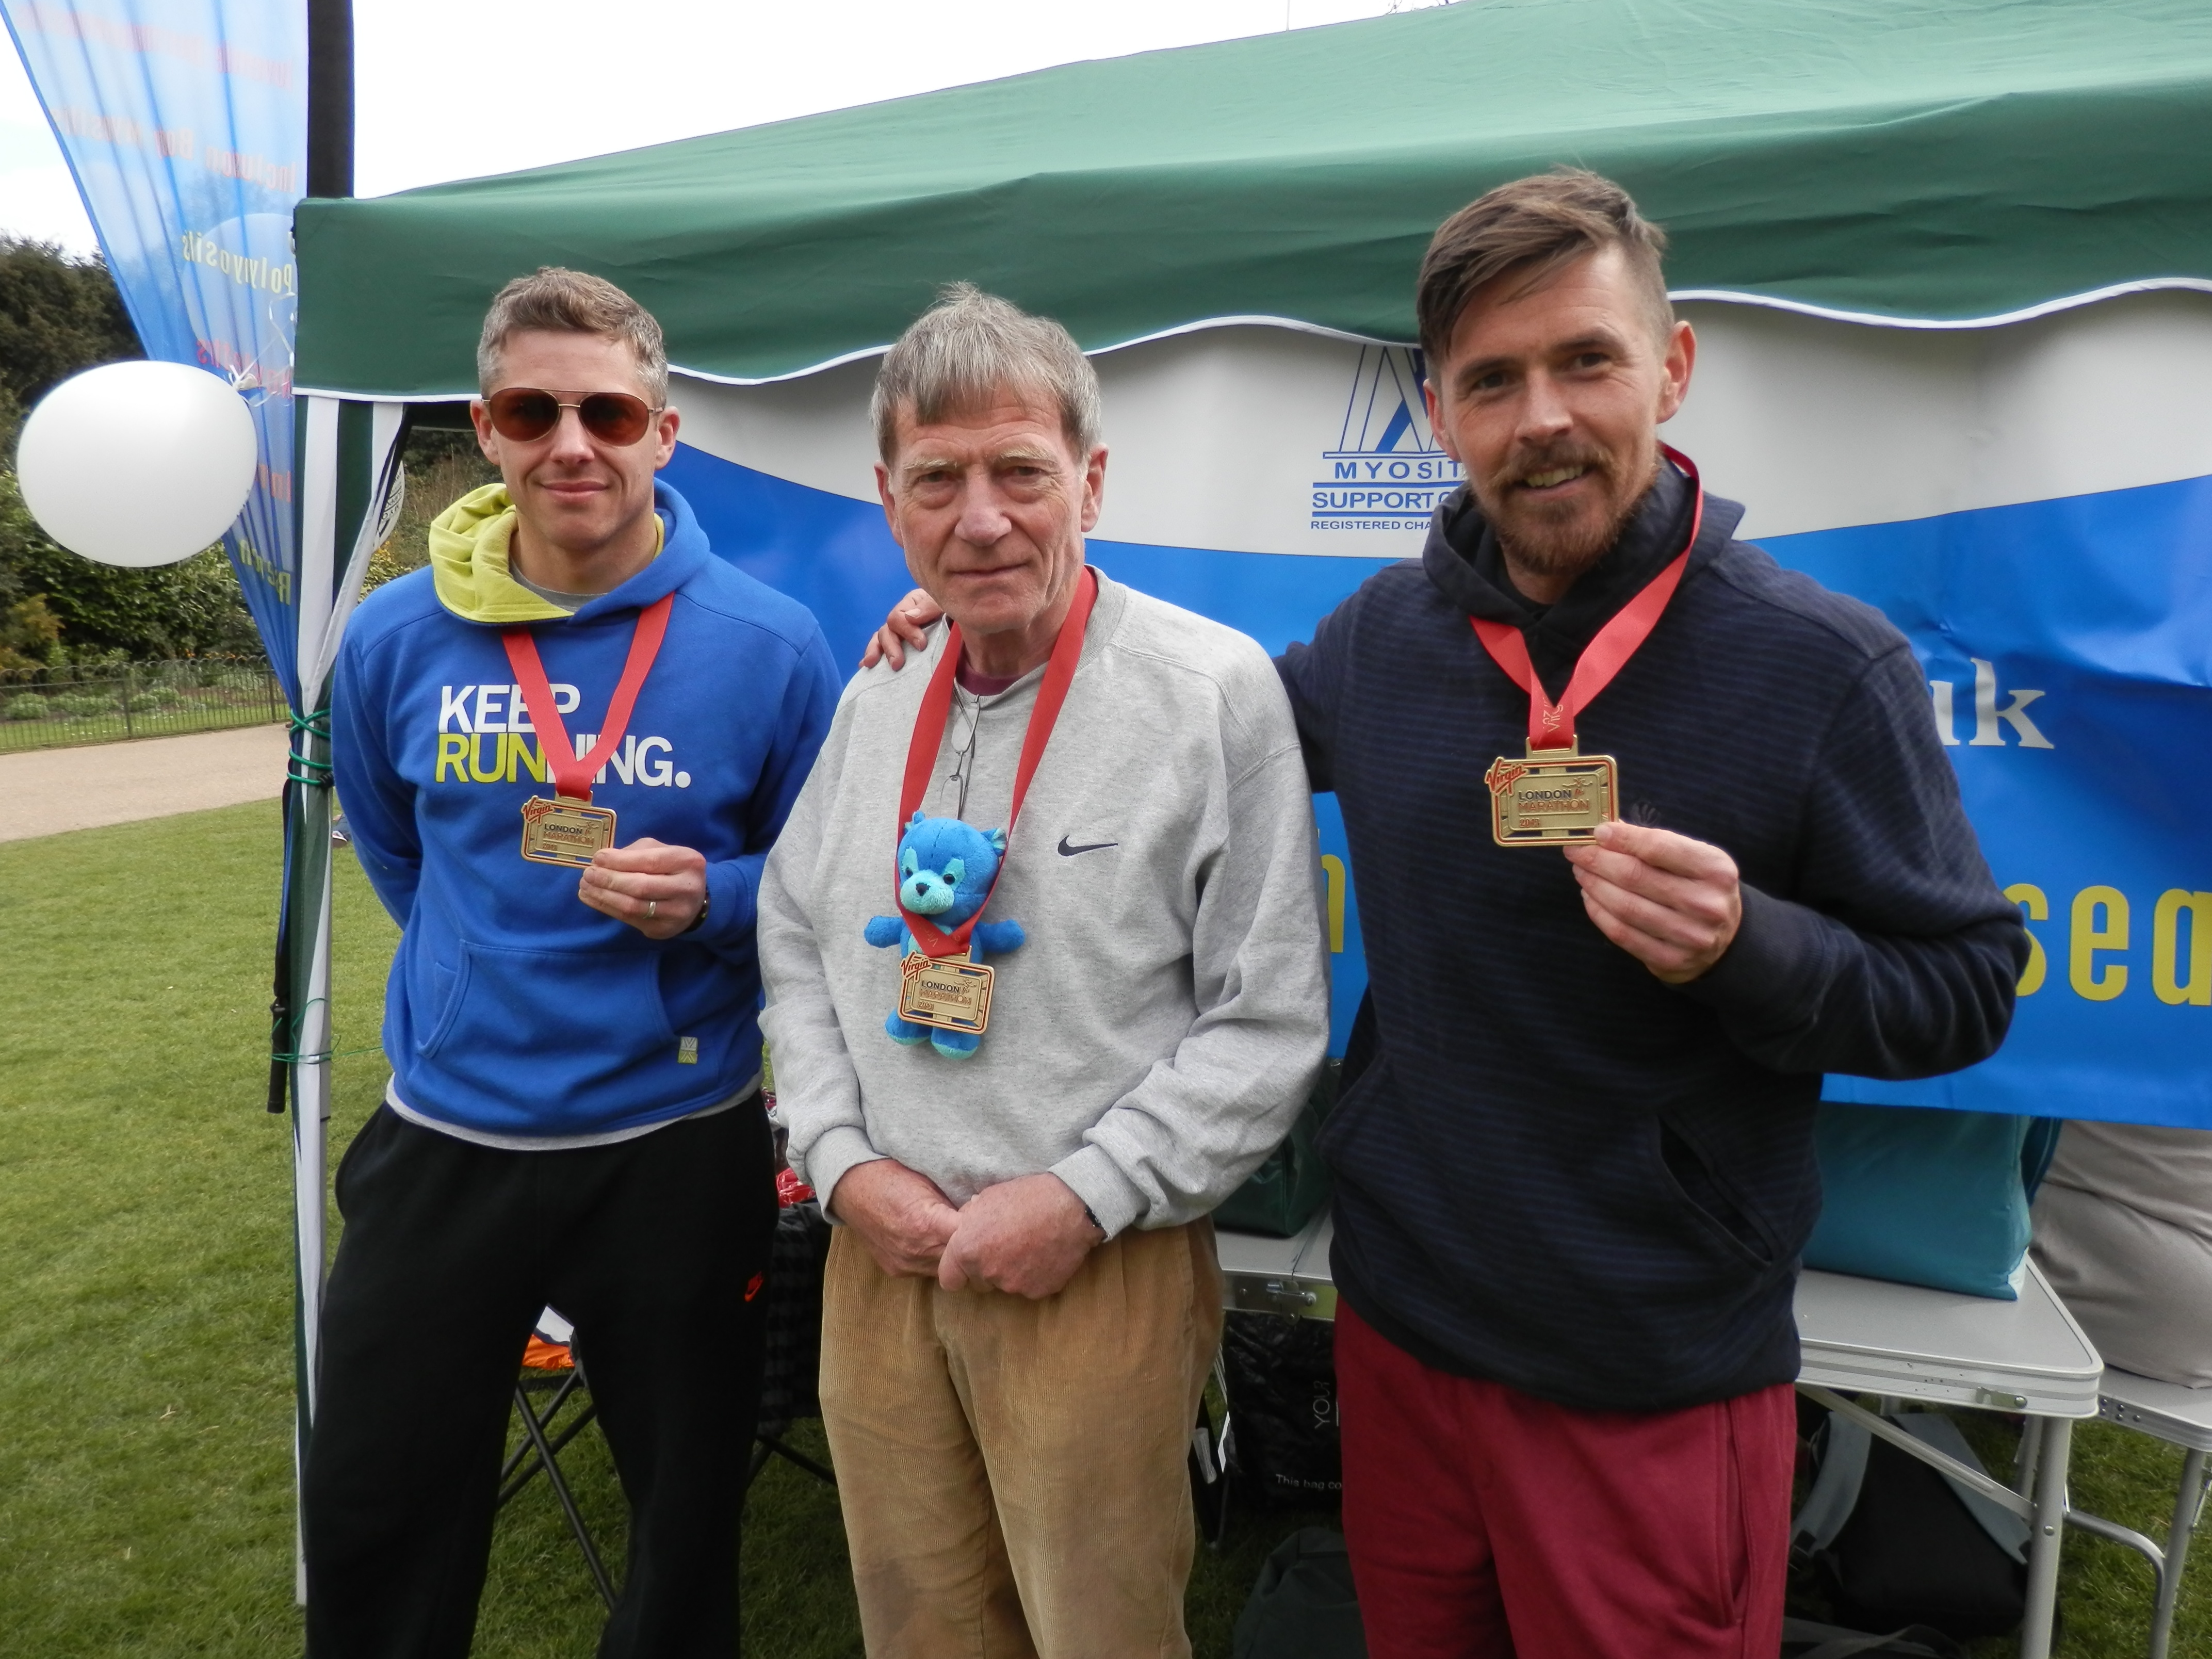 Three runners with their London Marathon medals.